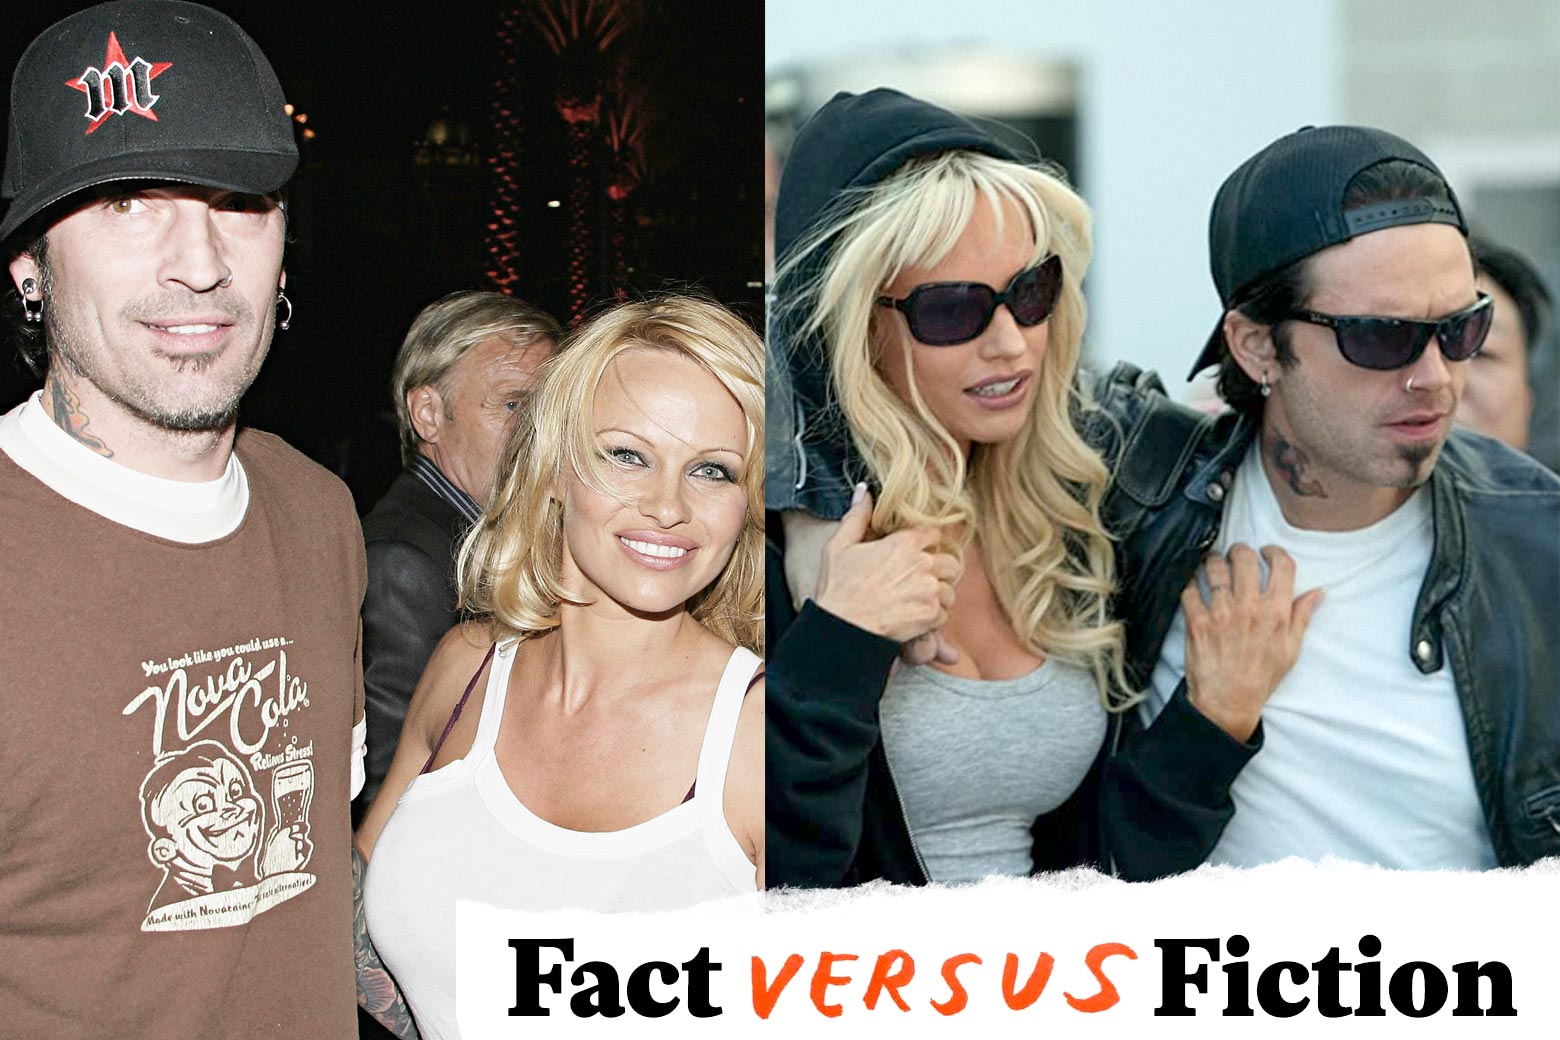 Pam and Tommy accuracy whats fact and whats fiction in the Hulu miniseries about Pamela Anderson and Tommy Lee. photo